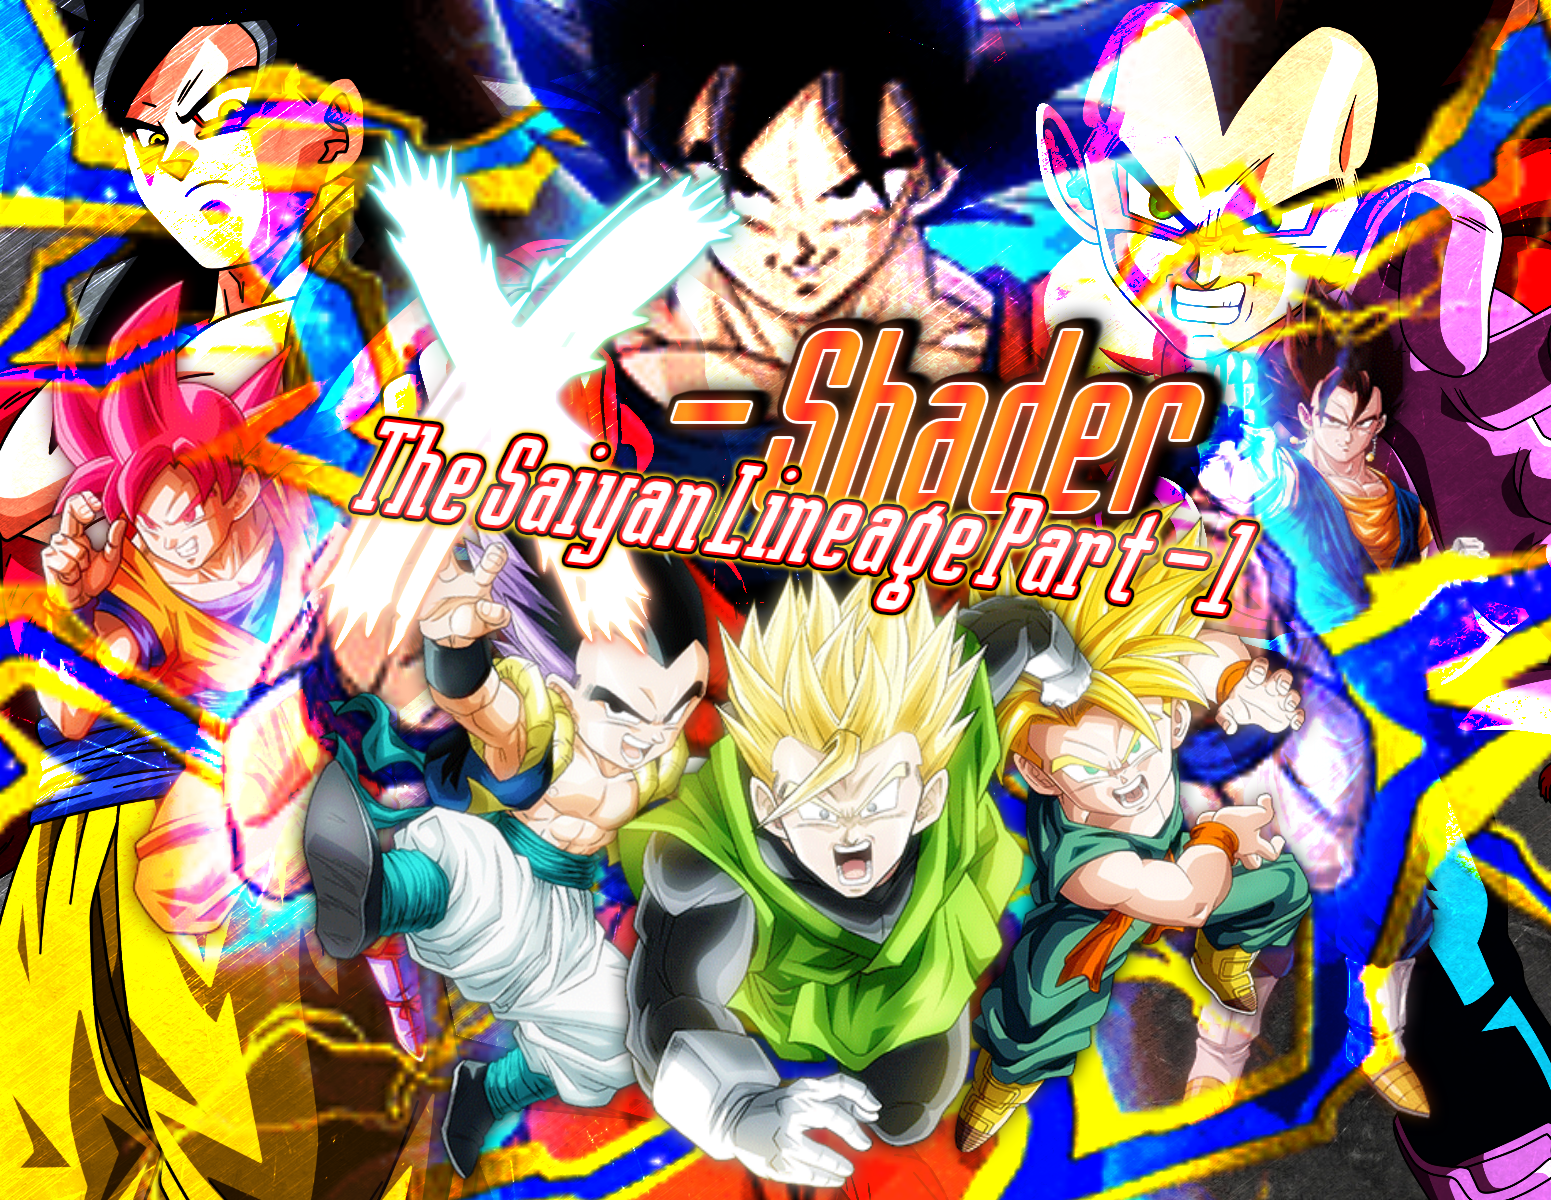 (KINDA EARLY RELEASE) X-Shader: THE SAIYAN LINEAGE PART 1